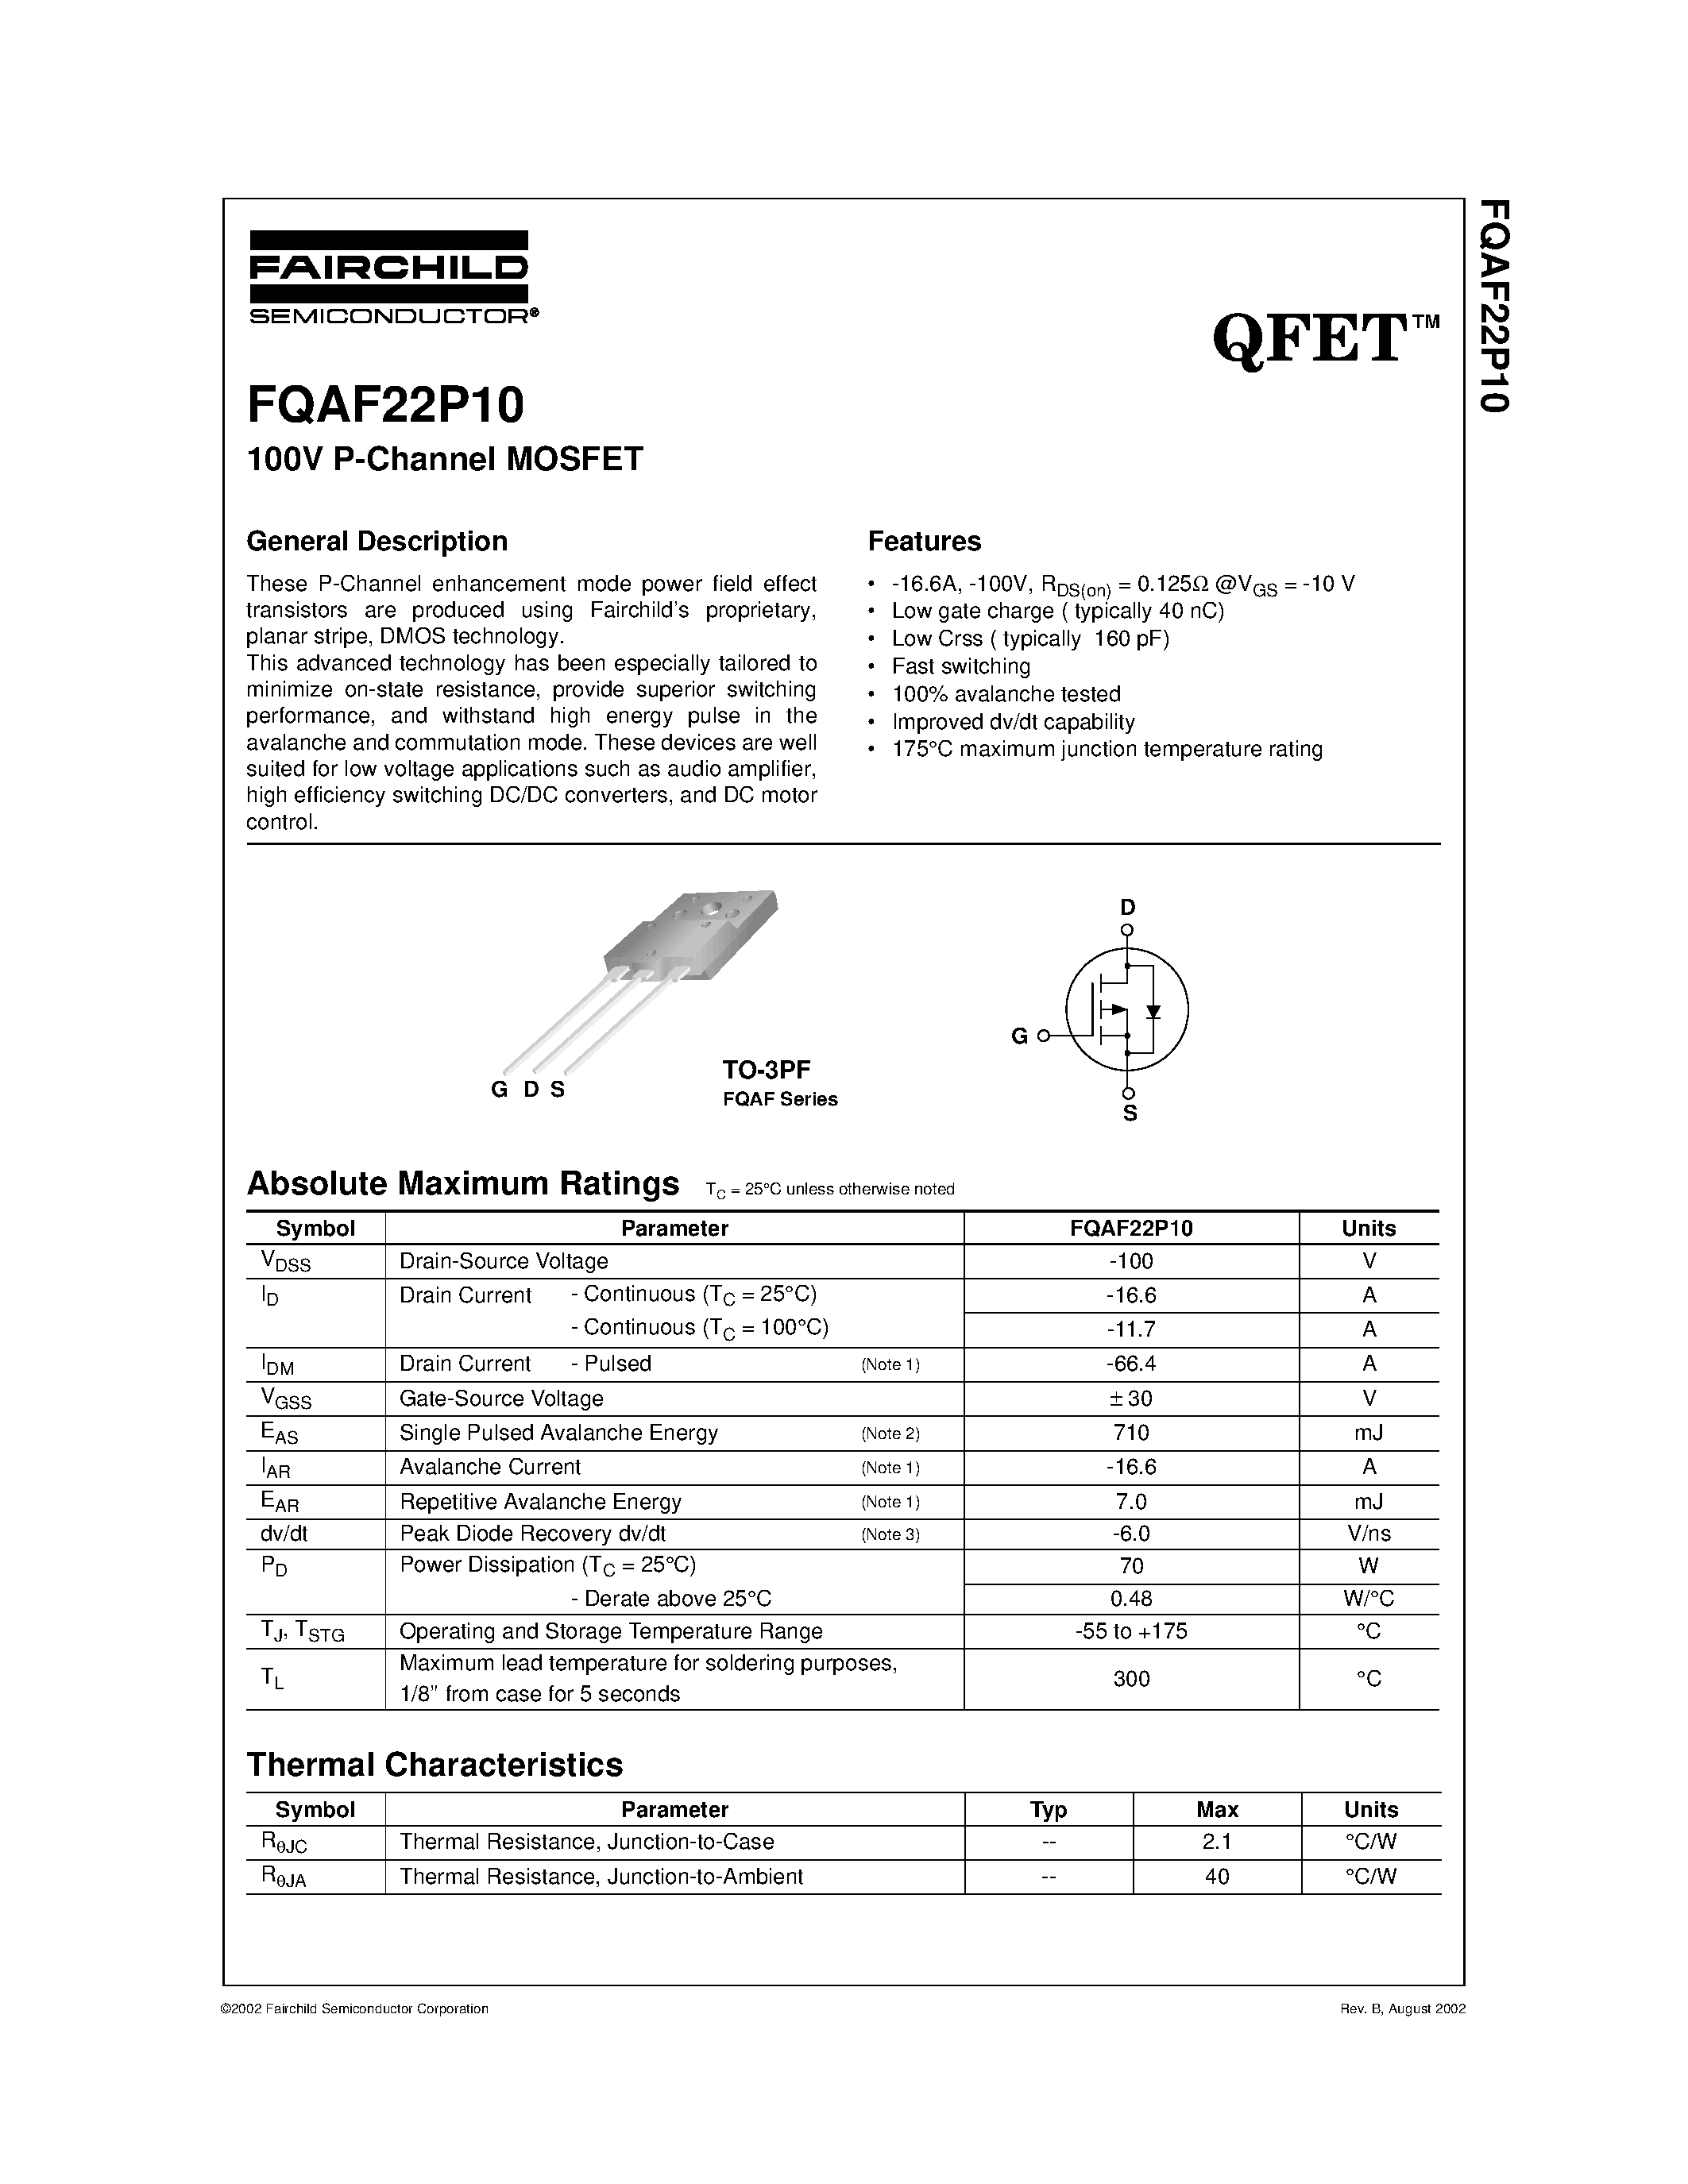 Datasheet FQAF22P10 - 100V P-Channel MOSFET page 1